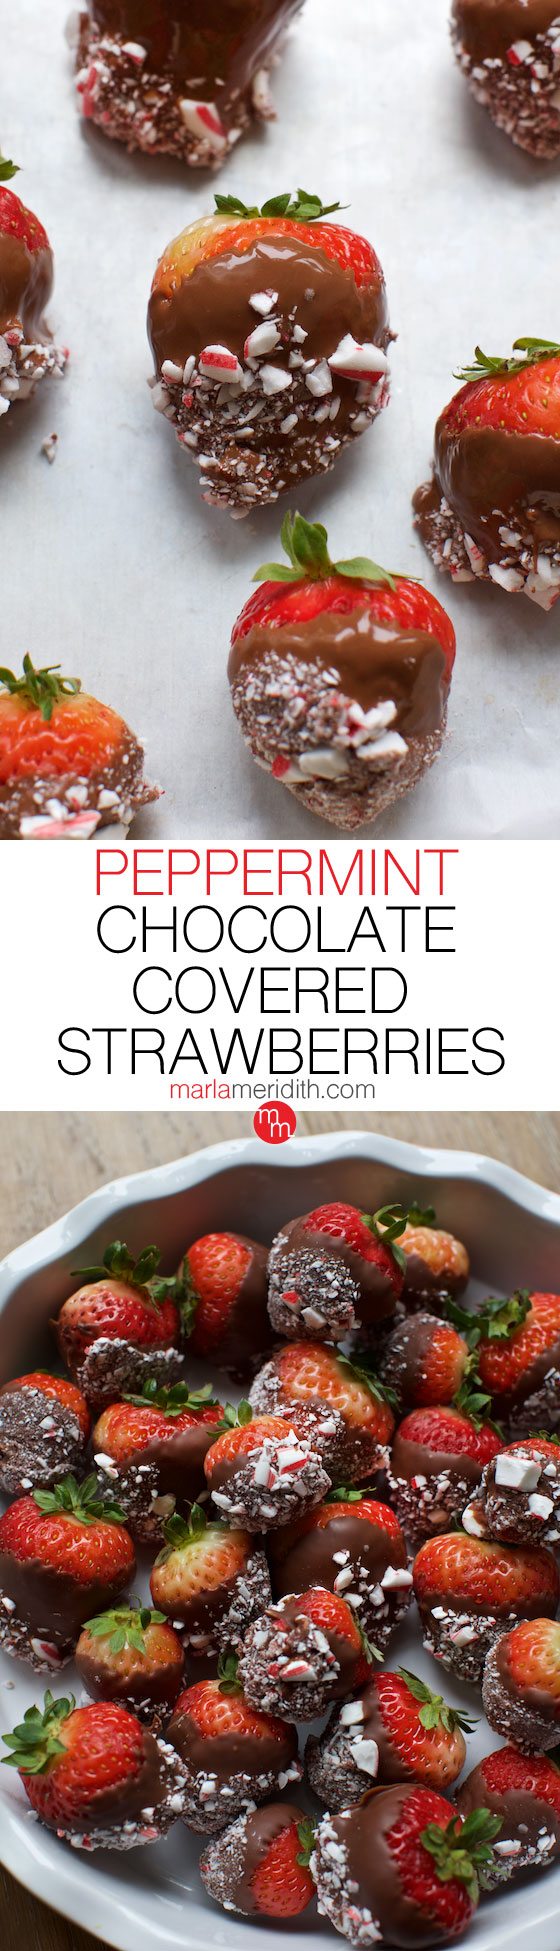 Peppermint Chocolate Covered Strawberries. A delicious holiday treat! MarlaMeridith.com ( @marlameridith )